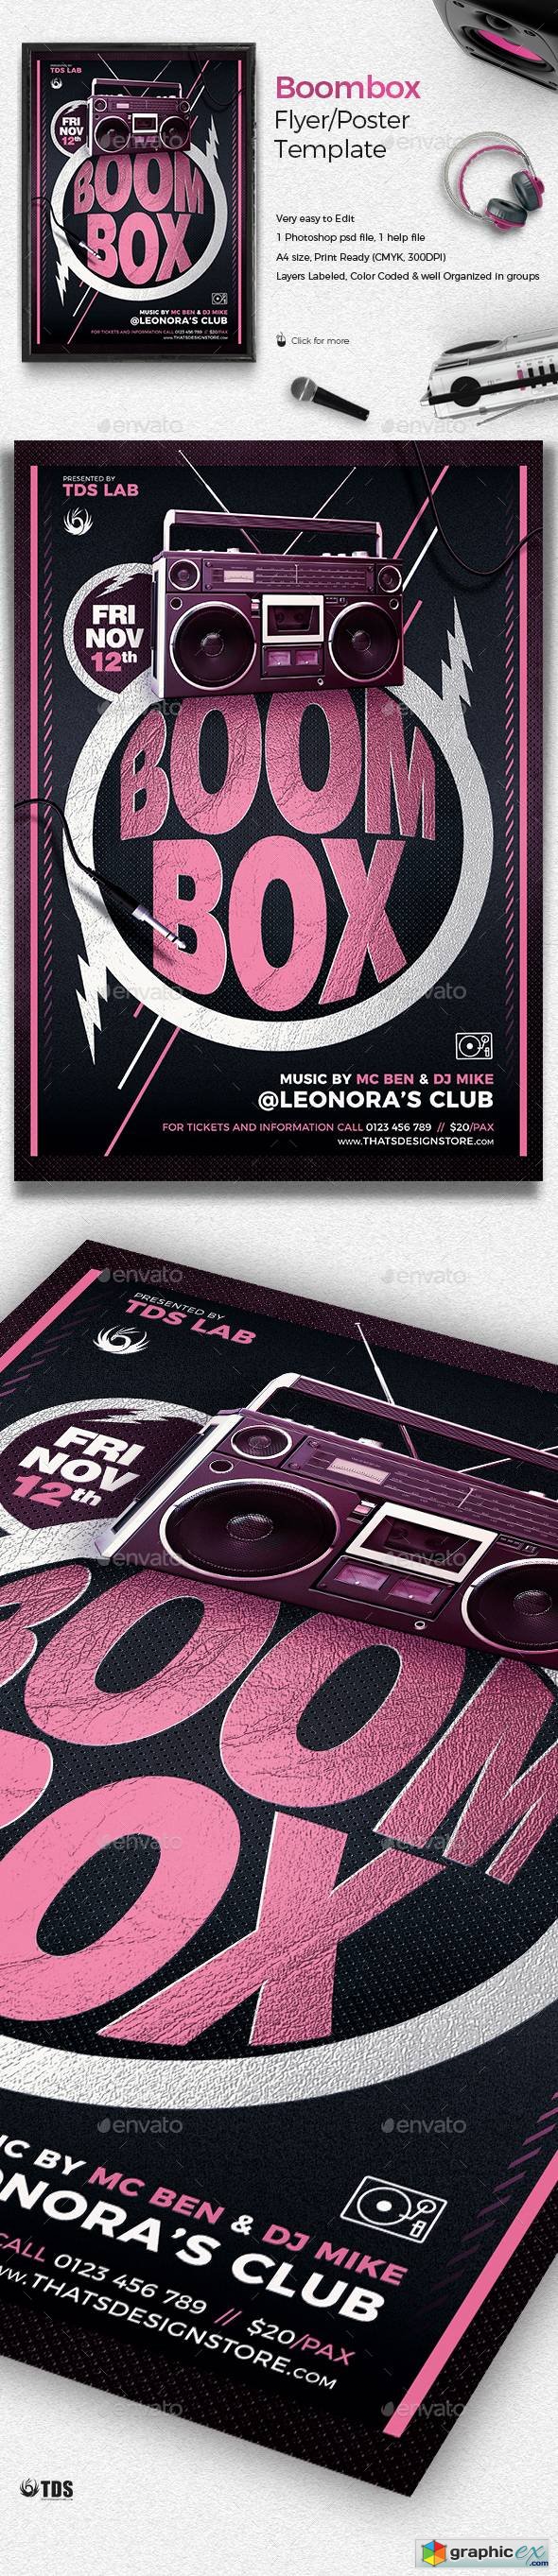 Boombox Flyer Template